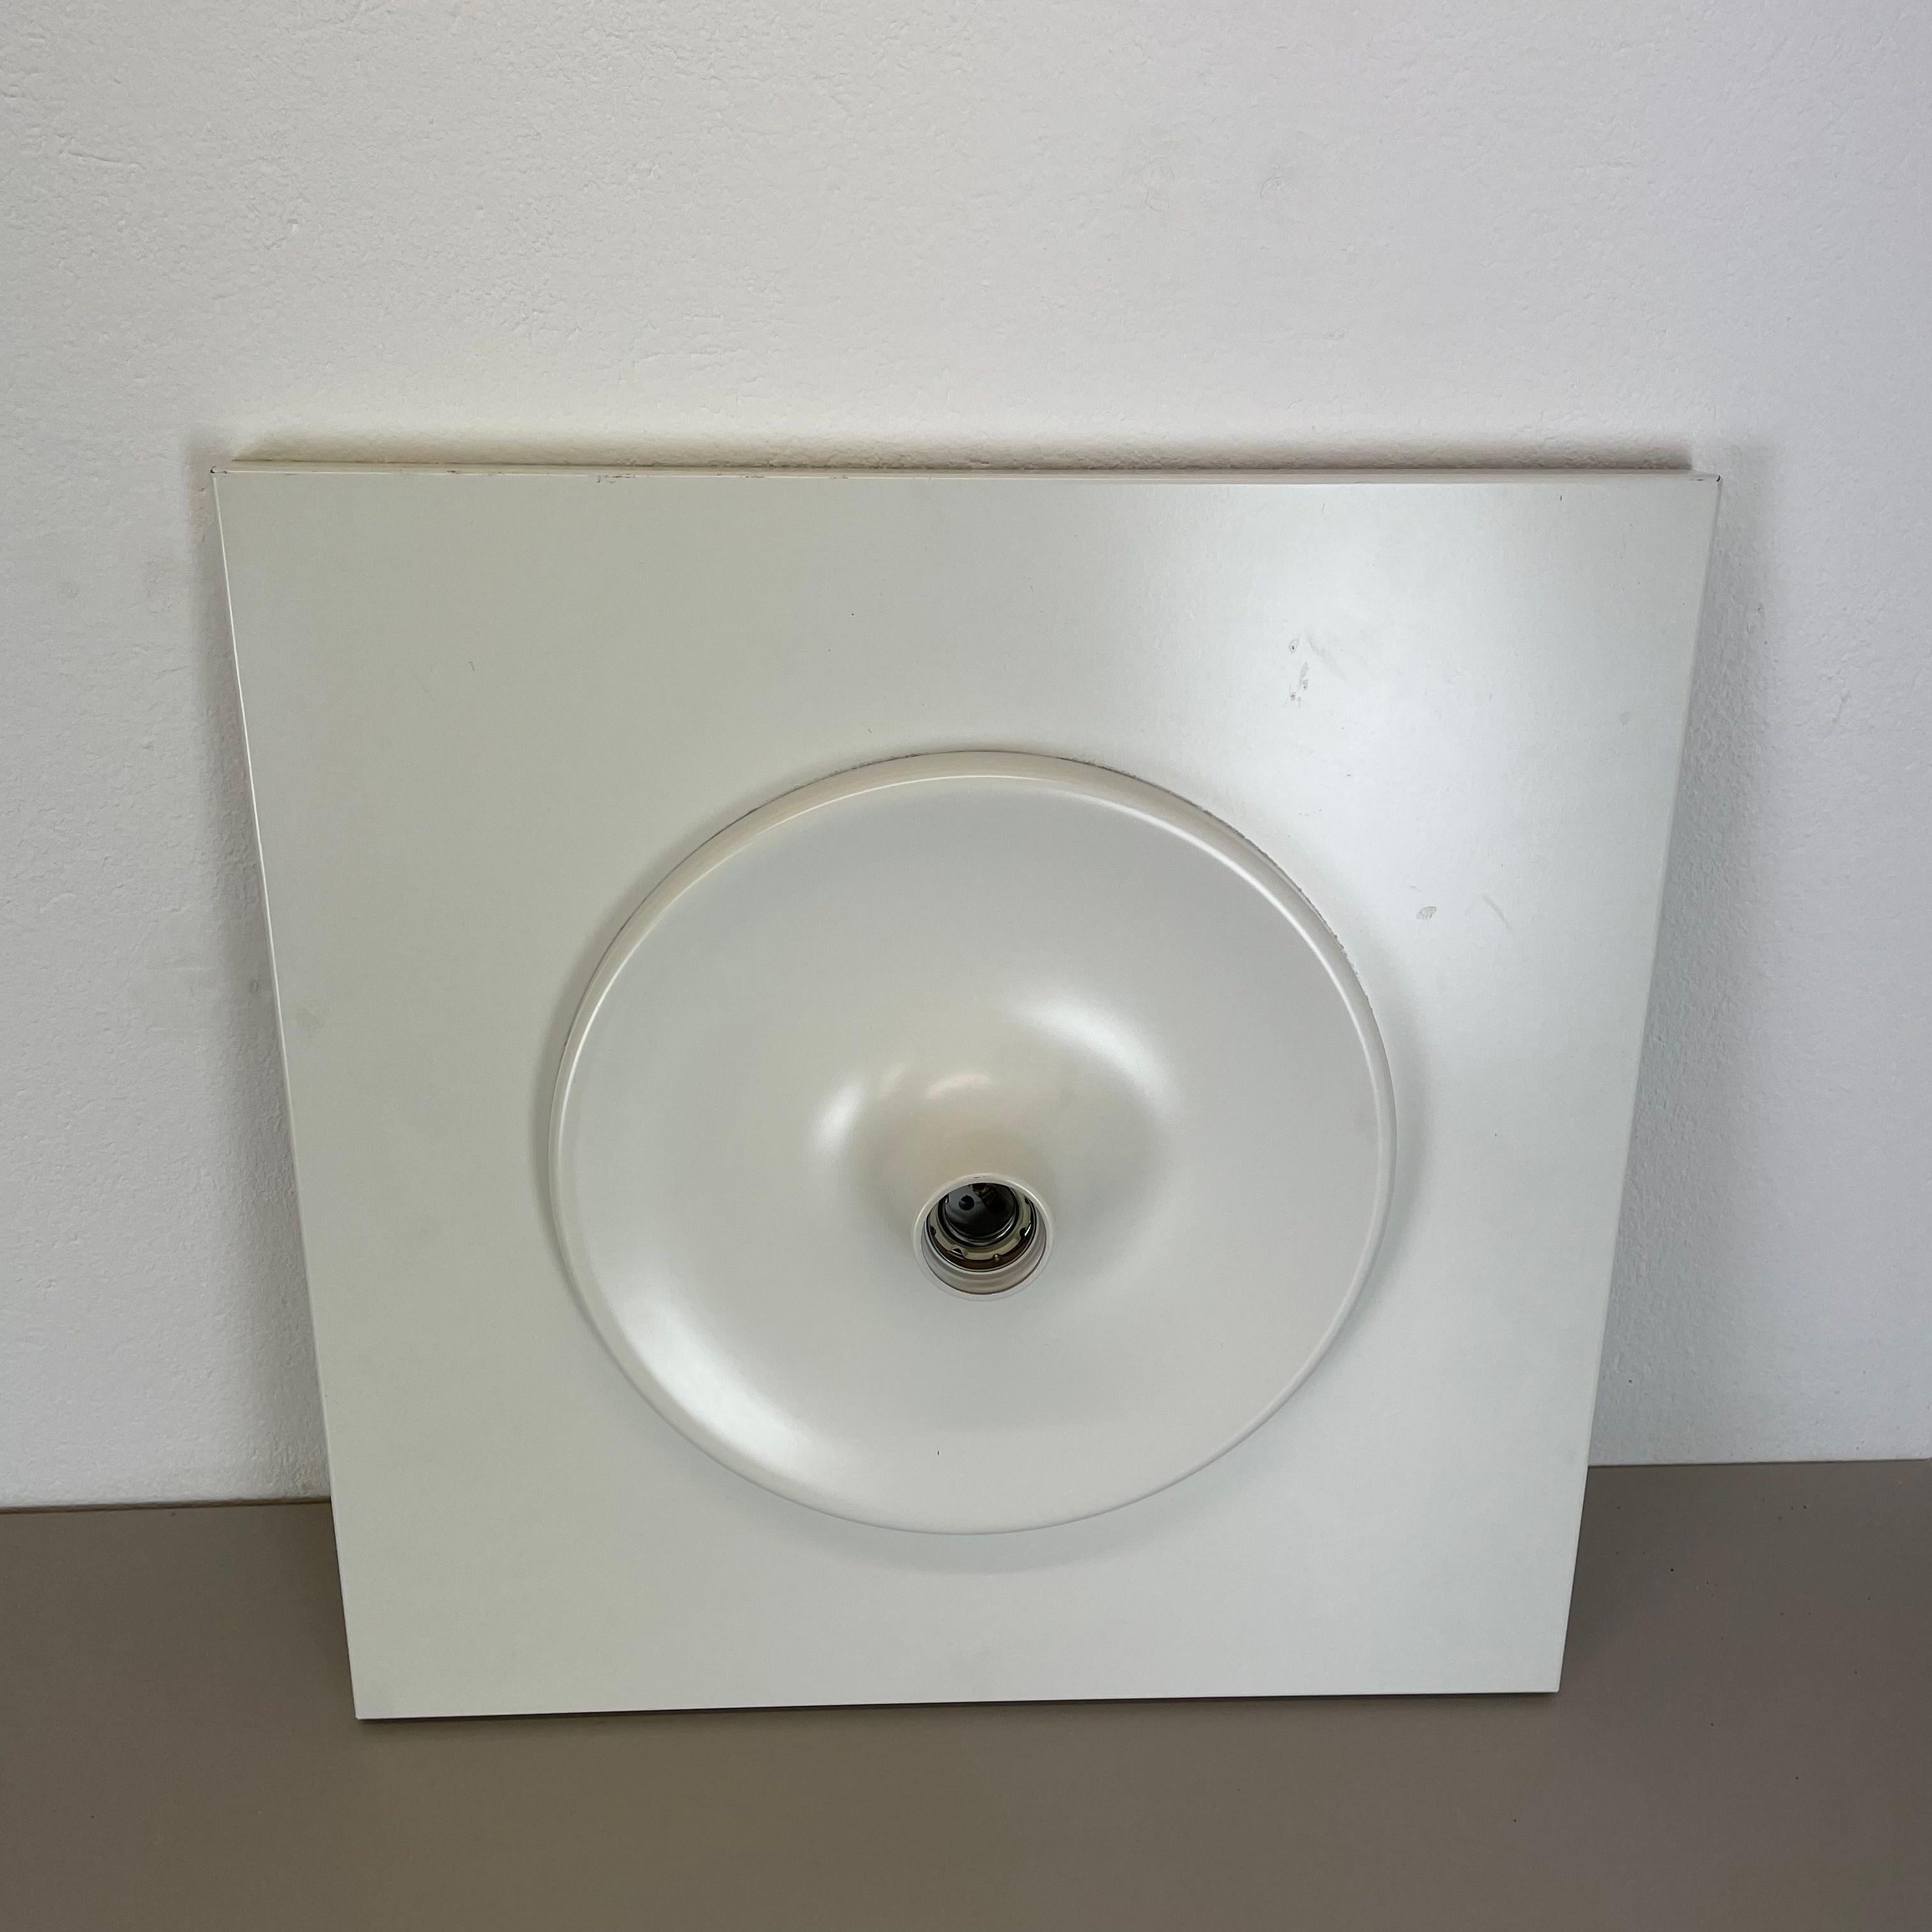 Rare White Xxl Wall Light Panel Element, Germany 1980s In Good Condition For Sale In Kirchlengern, DE